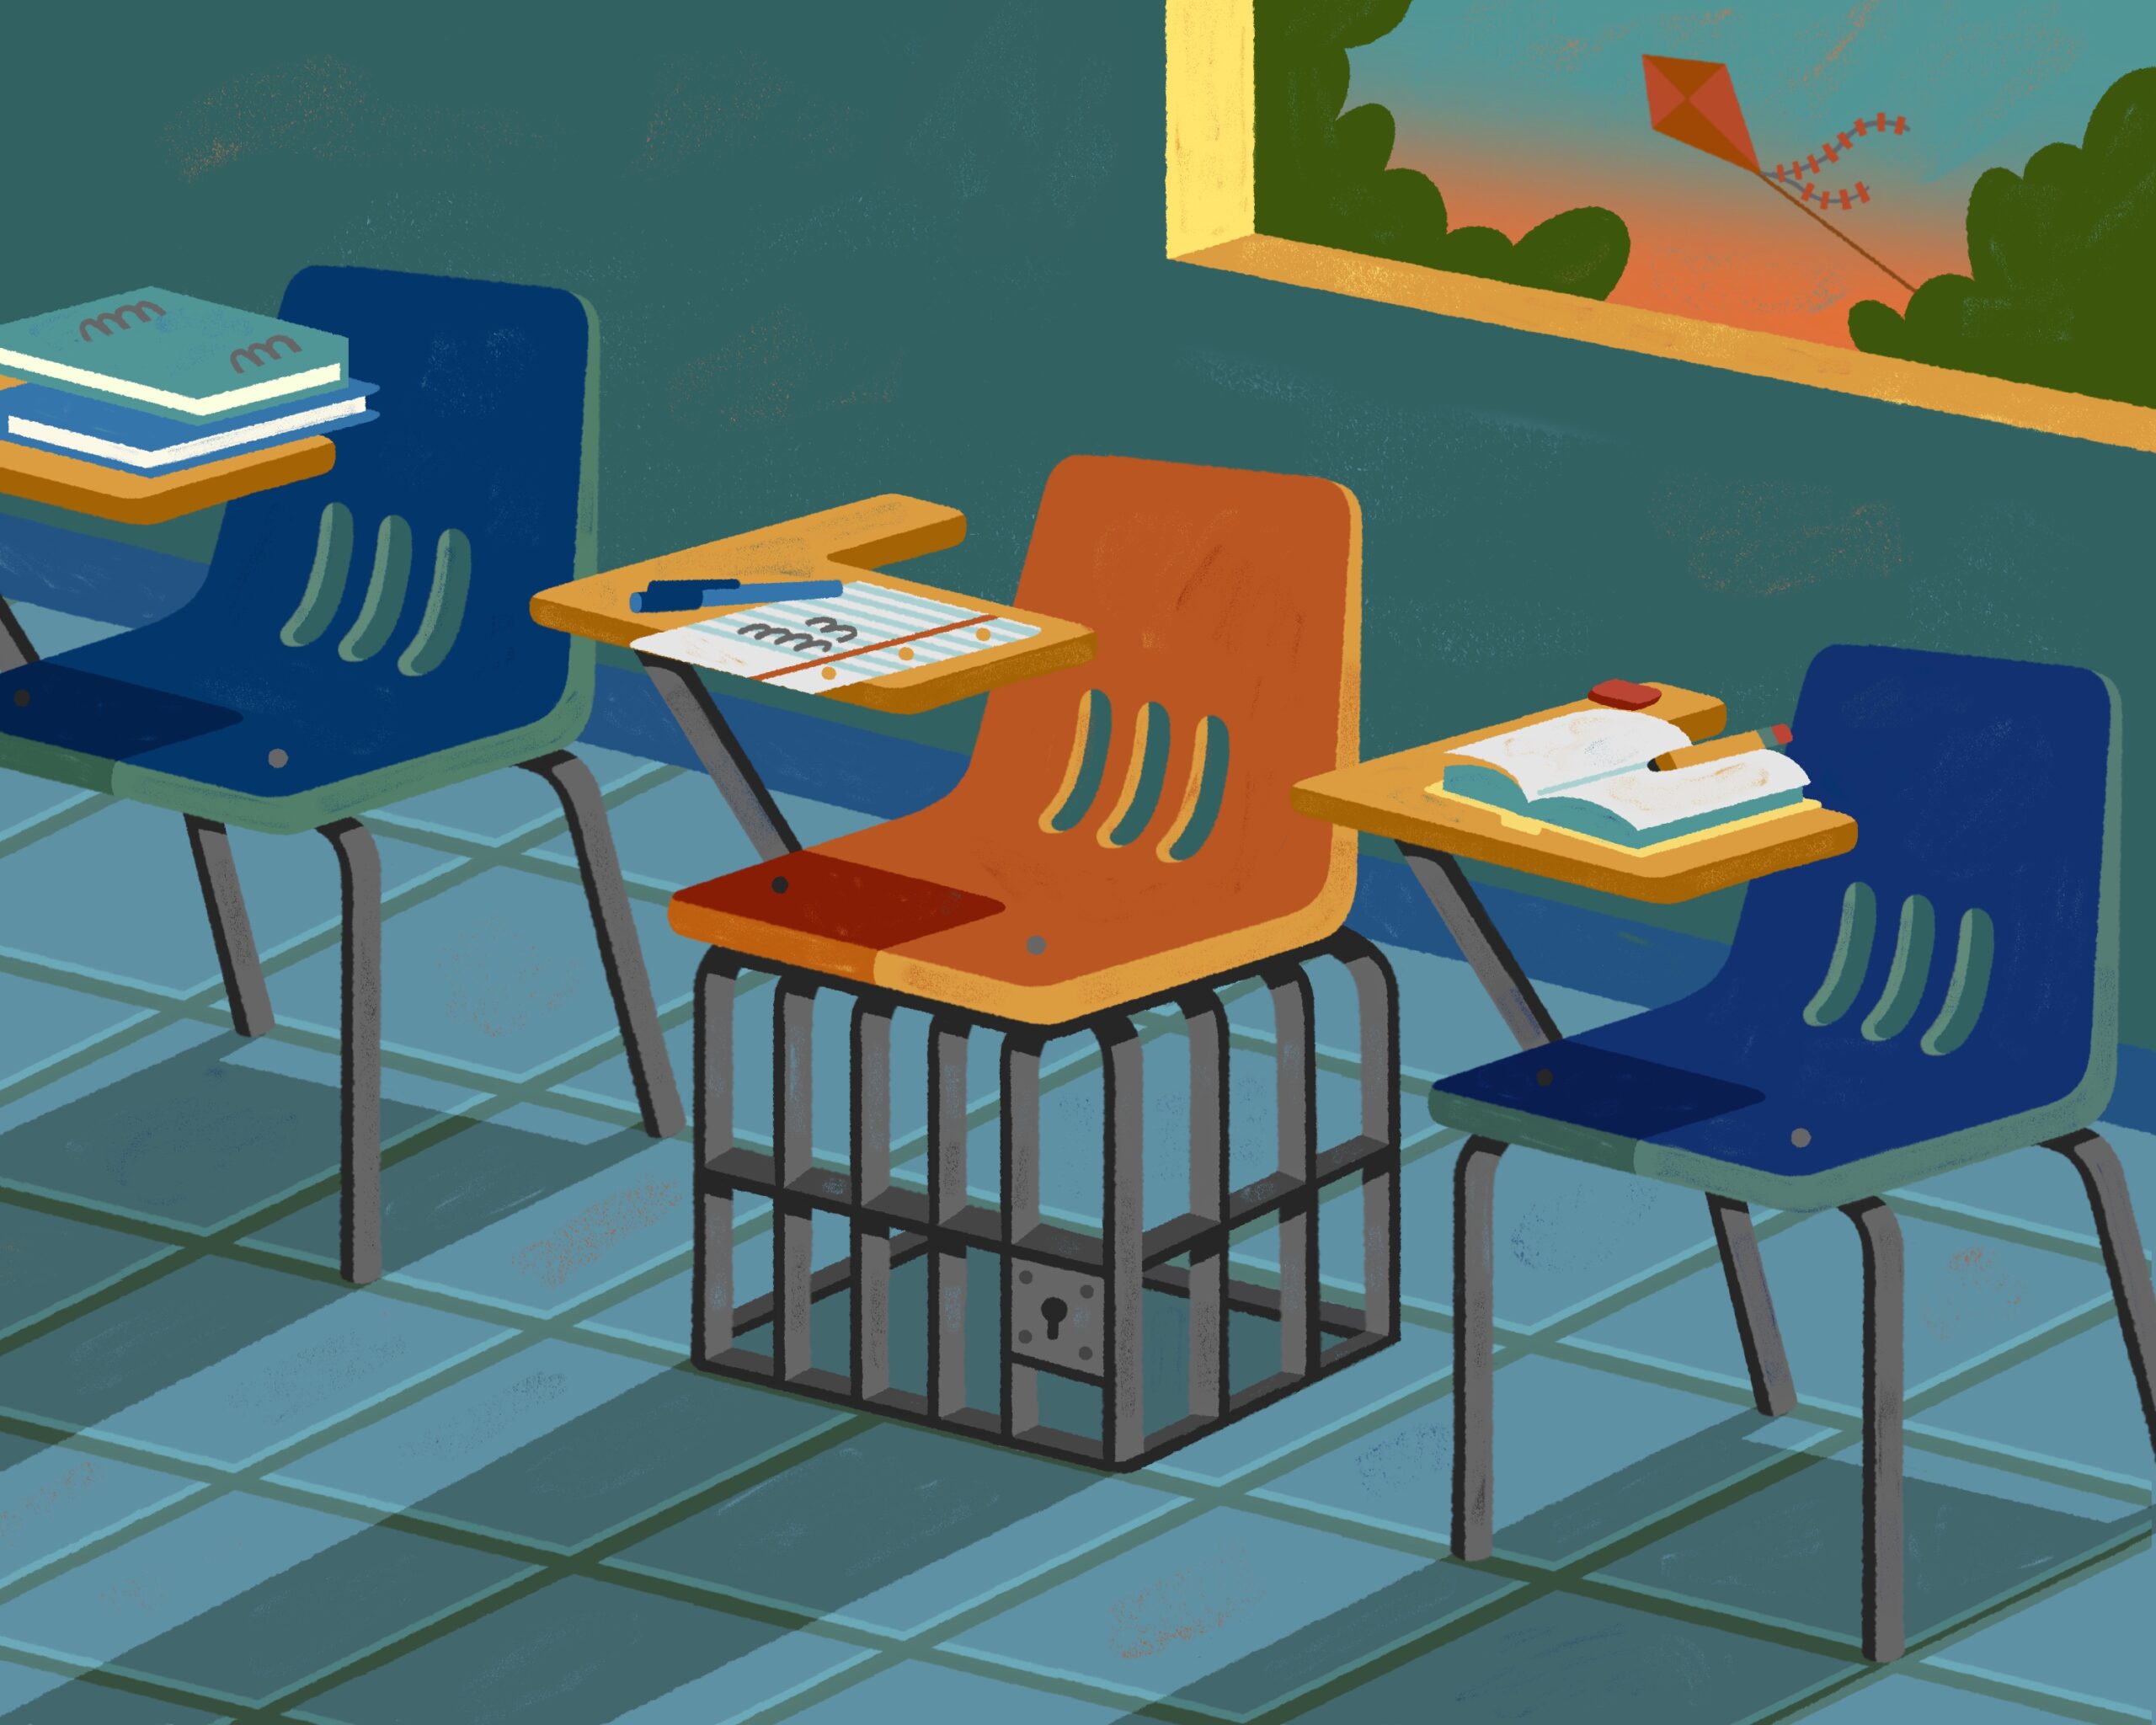 Illustration of three desks in a classroom, with an orange desk in between two blue desks. The orange desk has a prison cell built underneath it. Above the desks, a window reveals a sky outside and a kite flying in the distance.